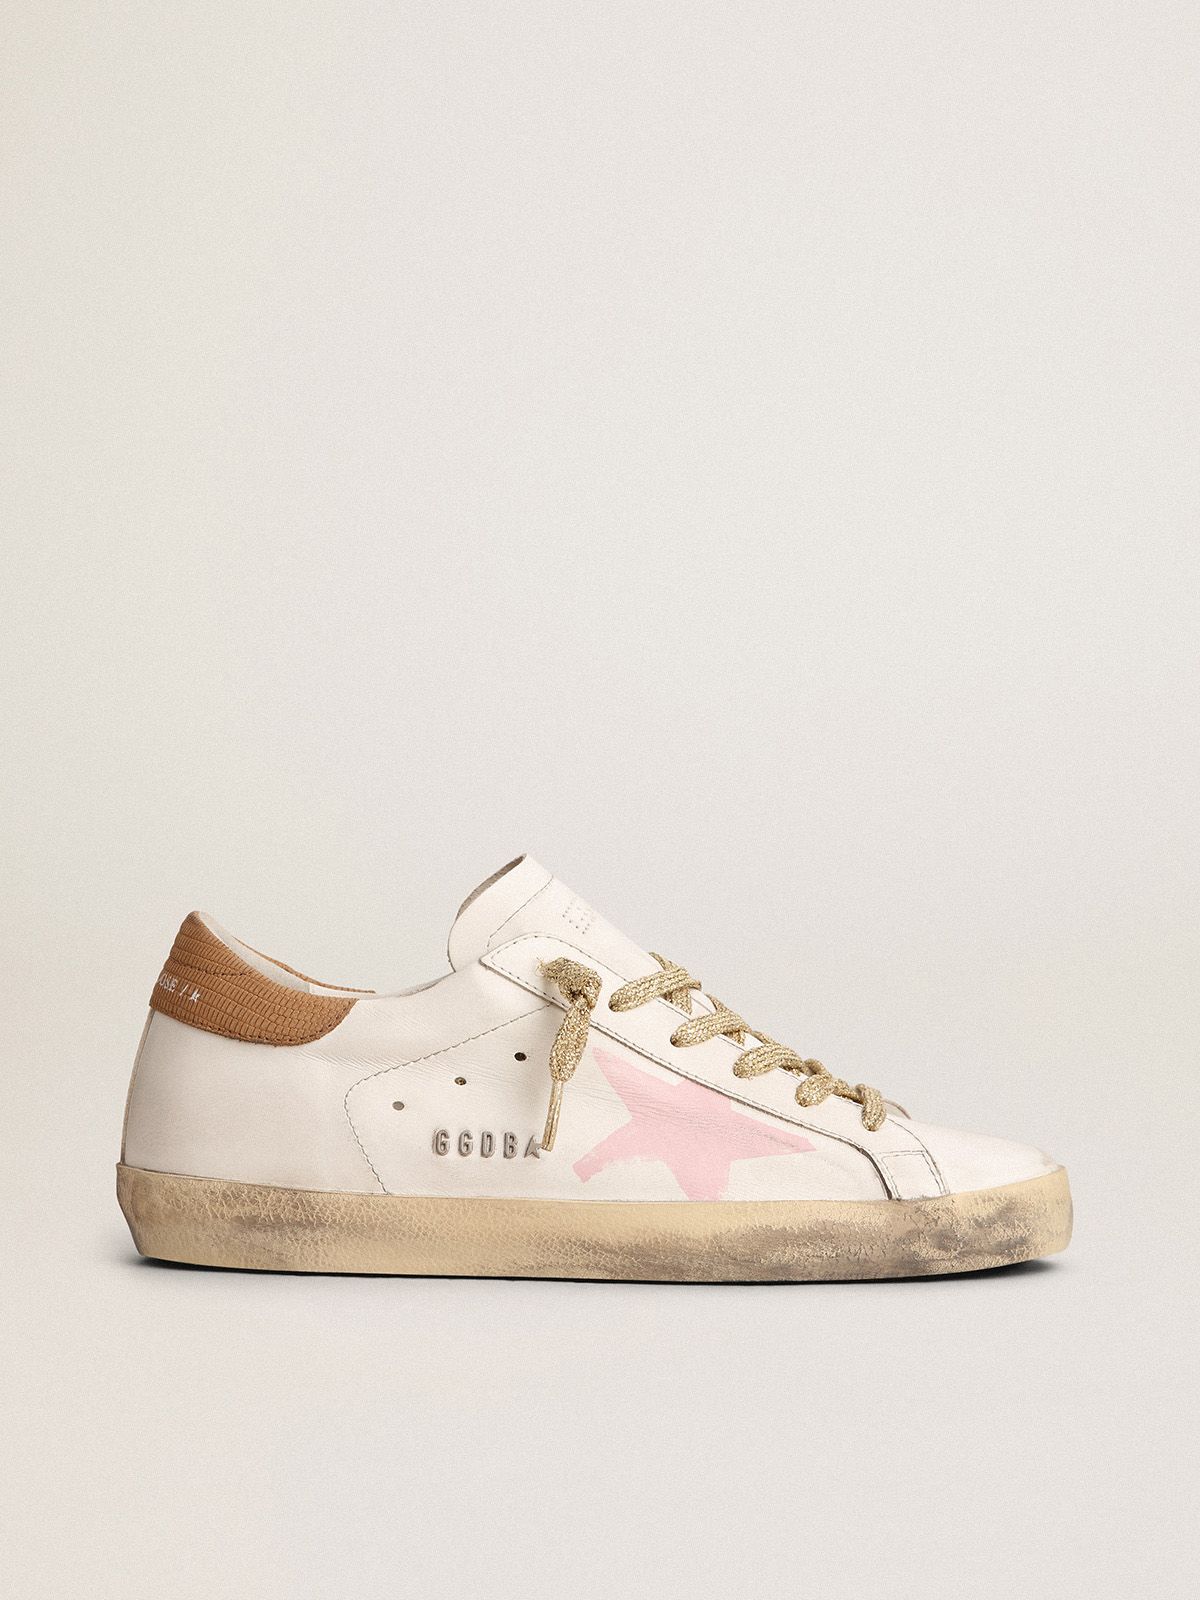 Sneakers Uomo Golden Goose Super-Star LTD sneakers with pink screen printed star and snake-print leather heel tab